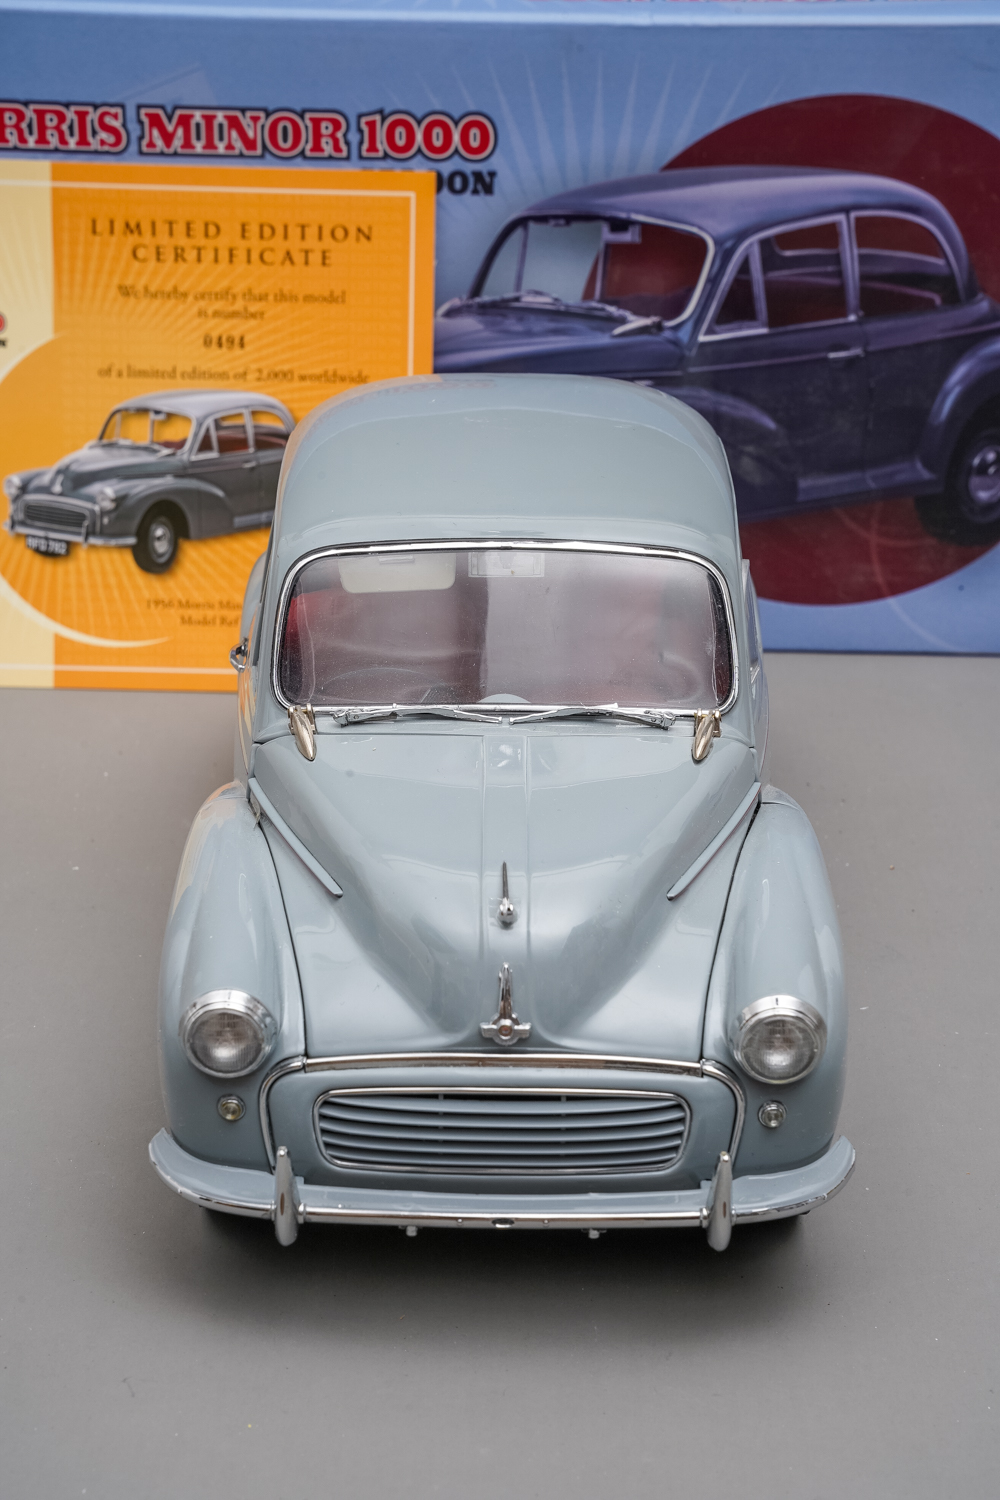 Sun Star 1/12 scale 1956 Morris Minor 1000 Saloon Boxed. - Image 2 of 6